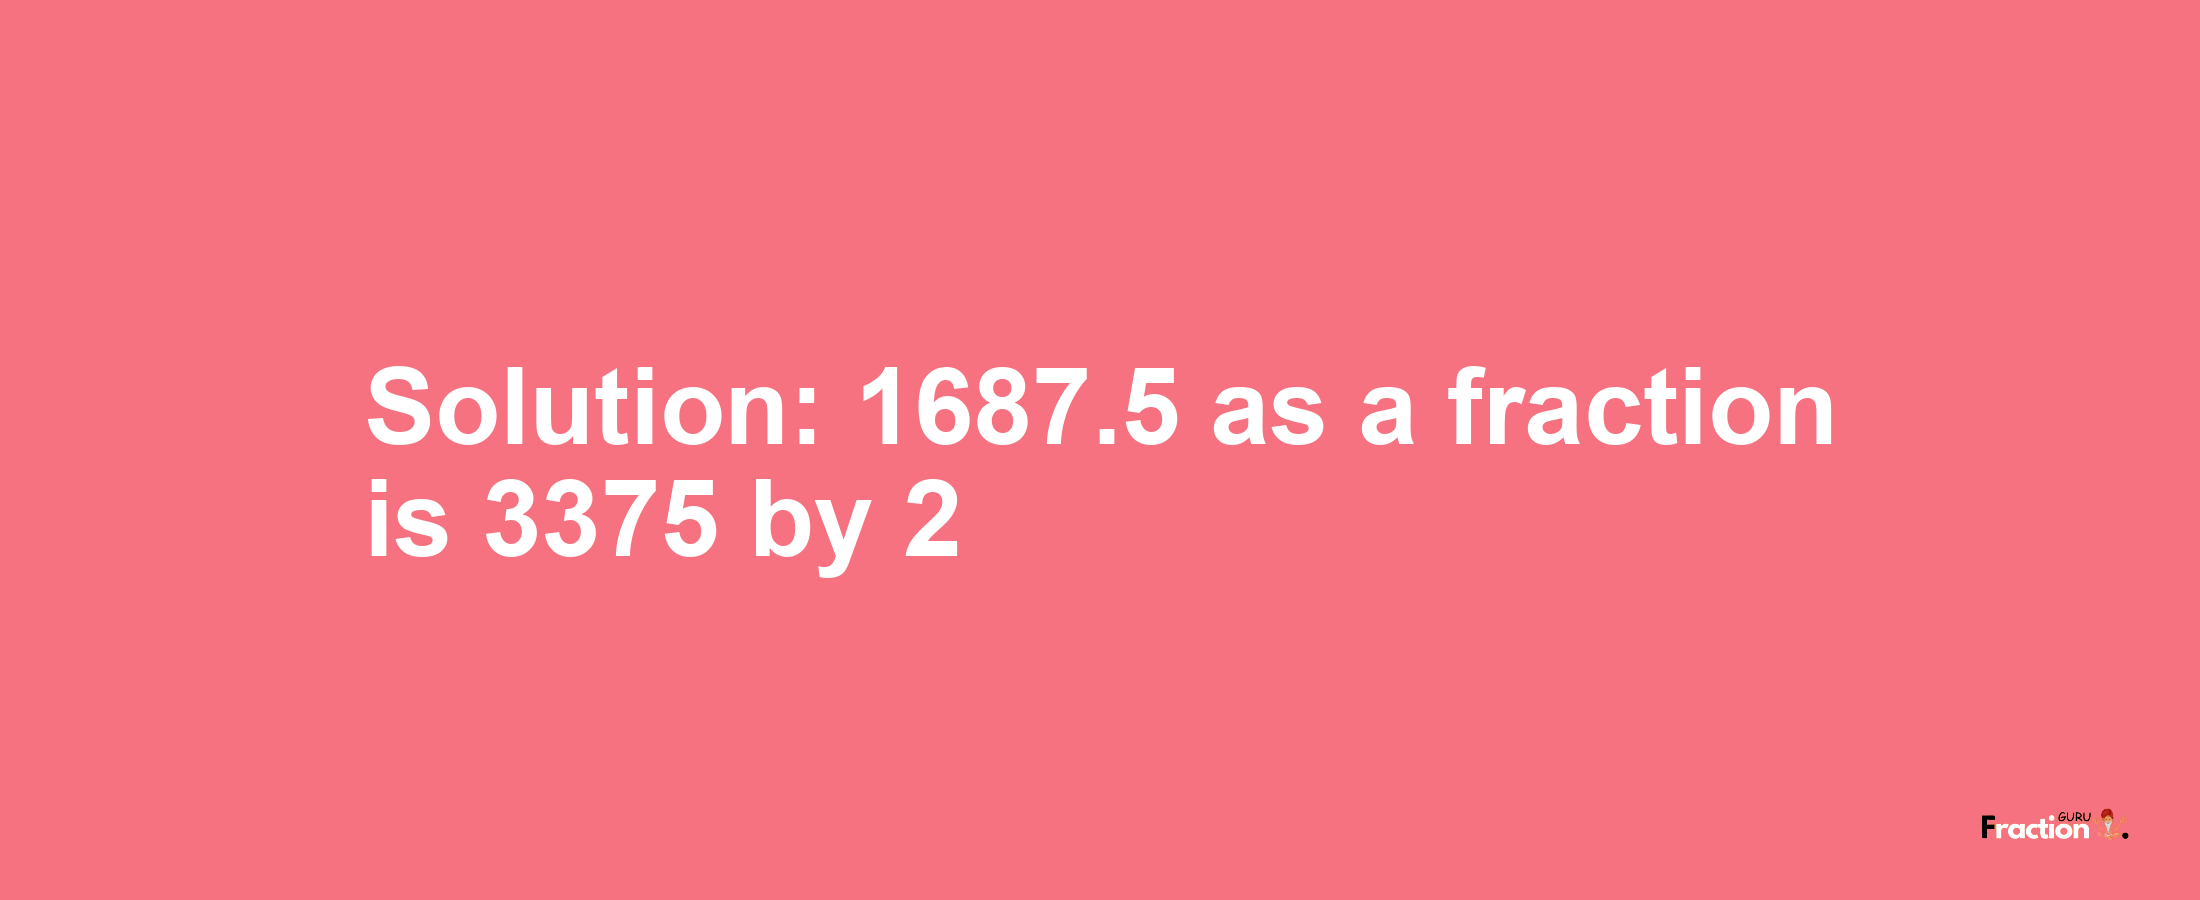 Solution:1687.5 as a fraction is 3375/2